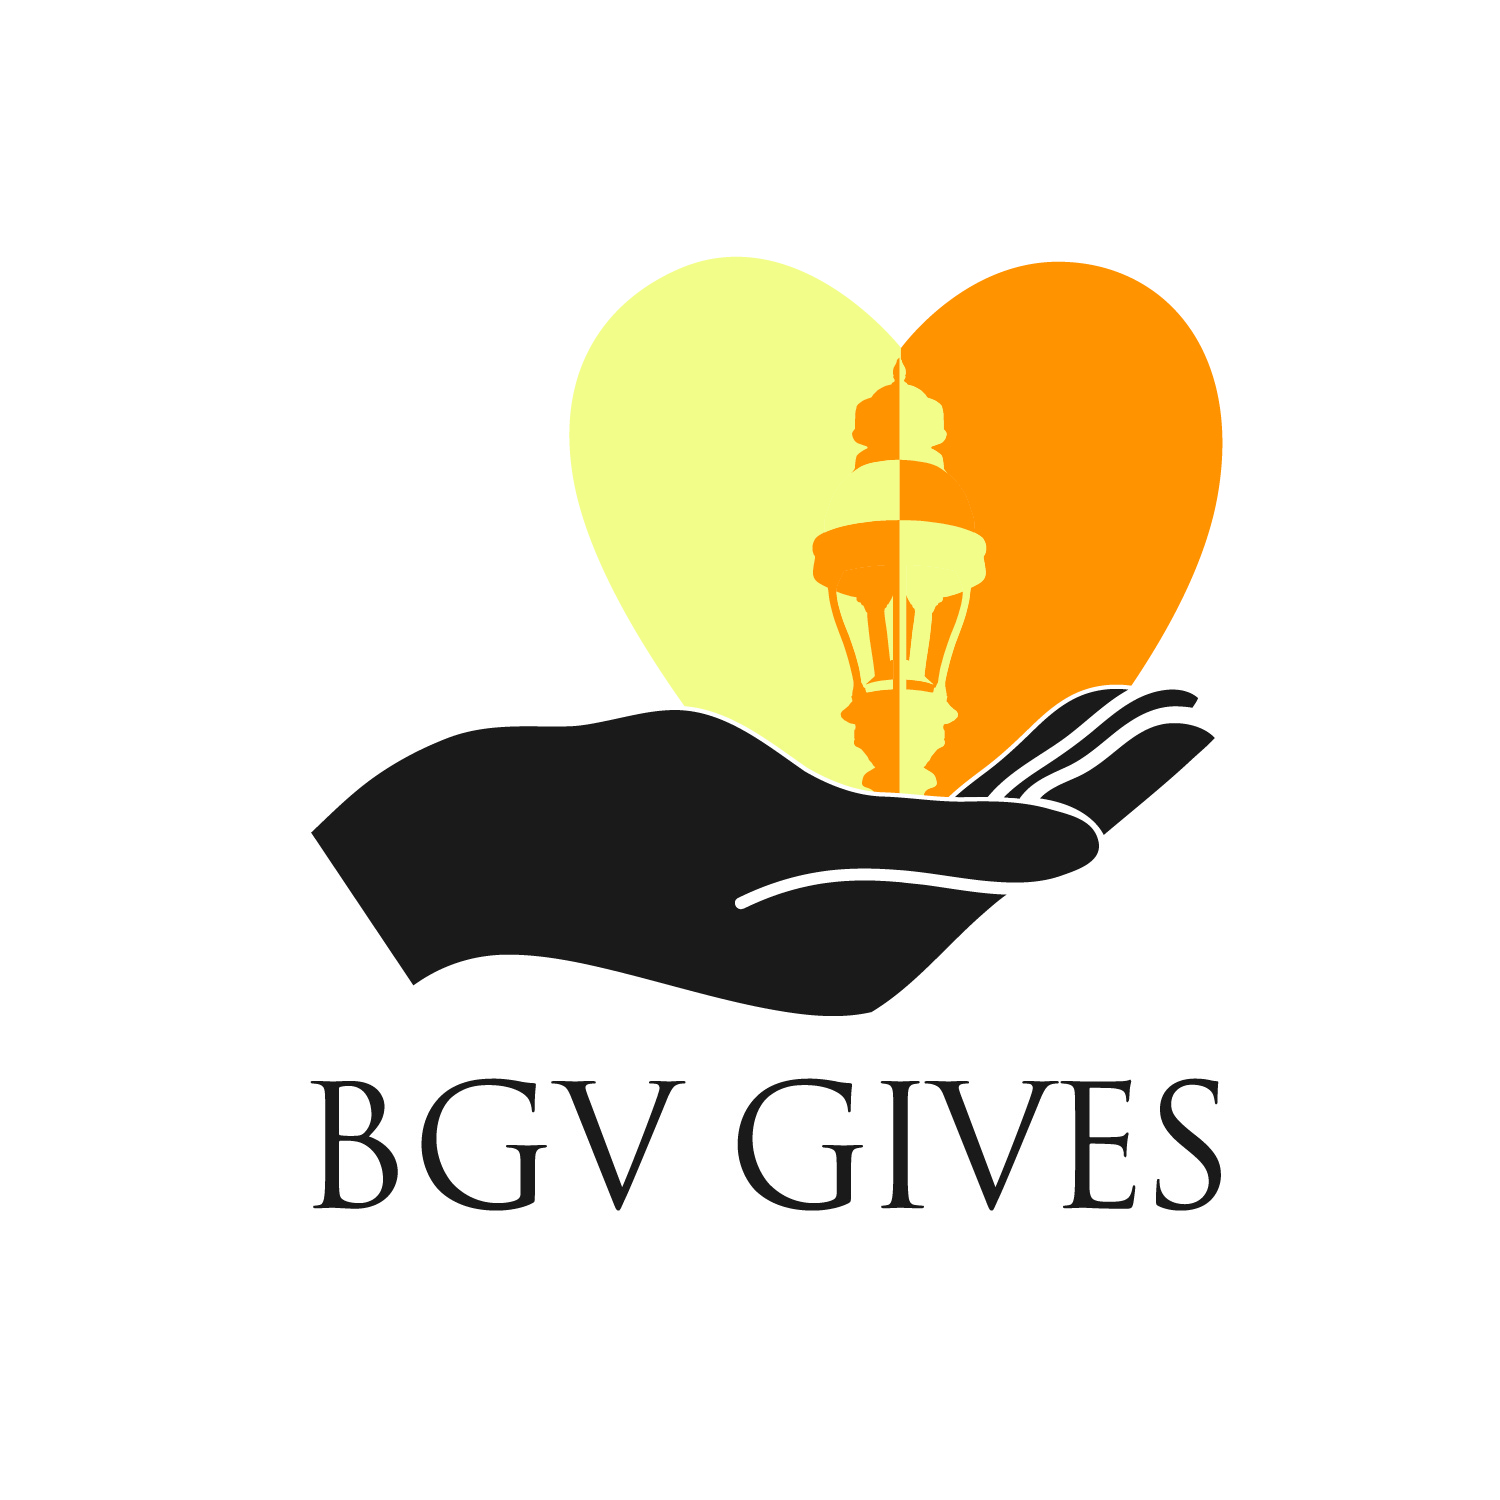 Founded in 2016, the BGV Gives Program was established to facilitate and further extend Breckenridge Grand Vacations’ philanthropic reach and impact in Summit County and the surrounding area.